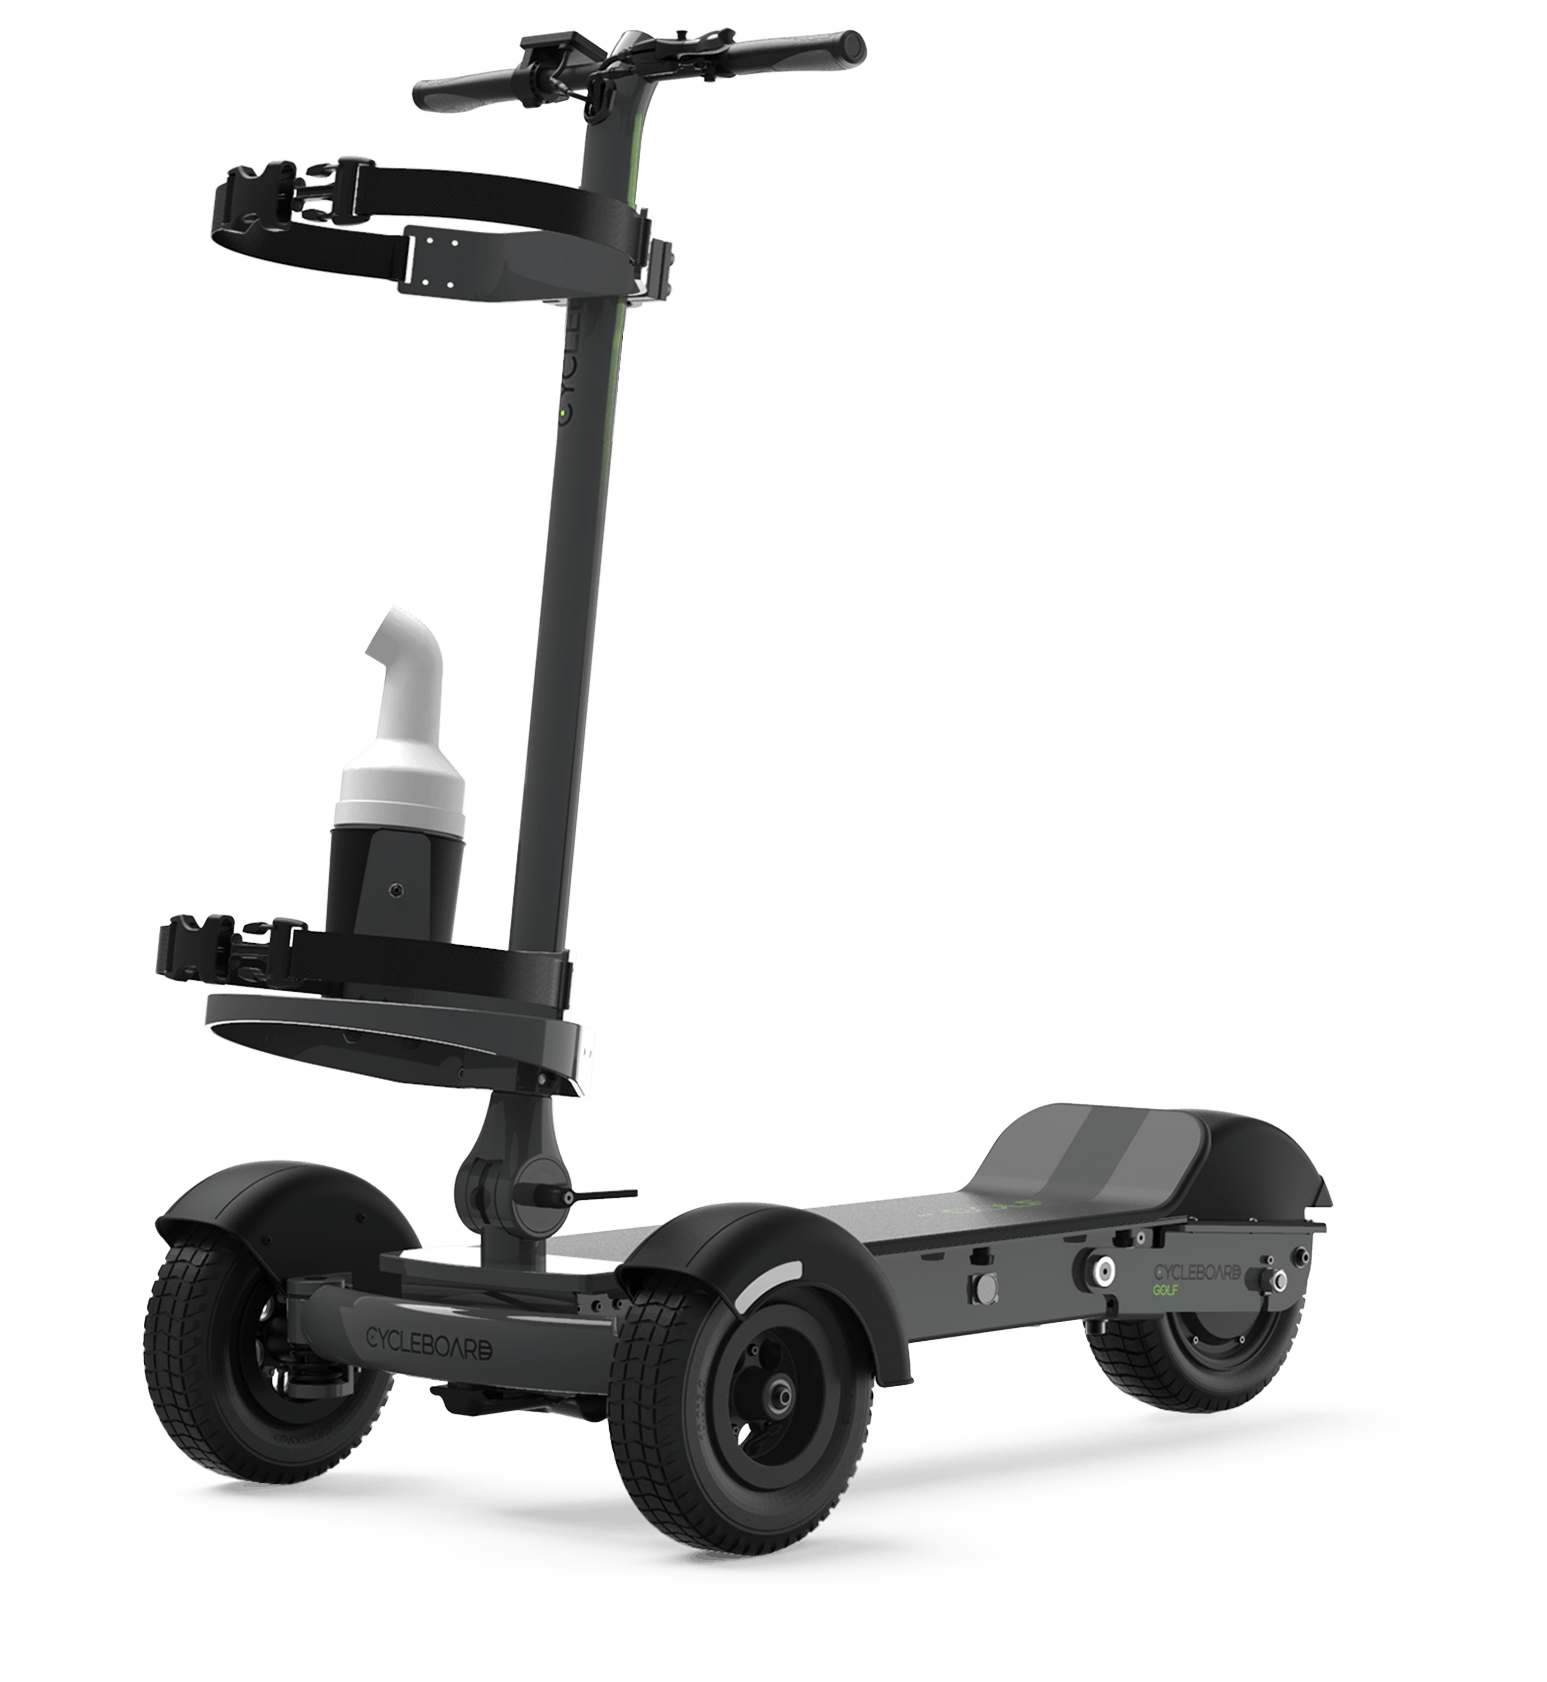 CycleBoard Golf  Your Personal Electric Golf Vehicle